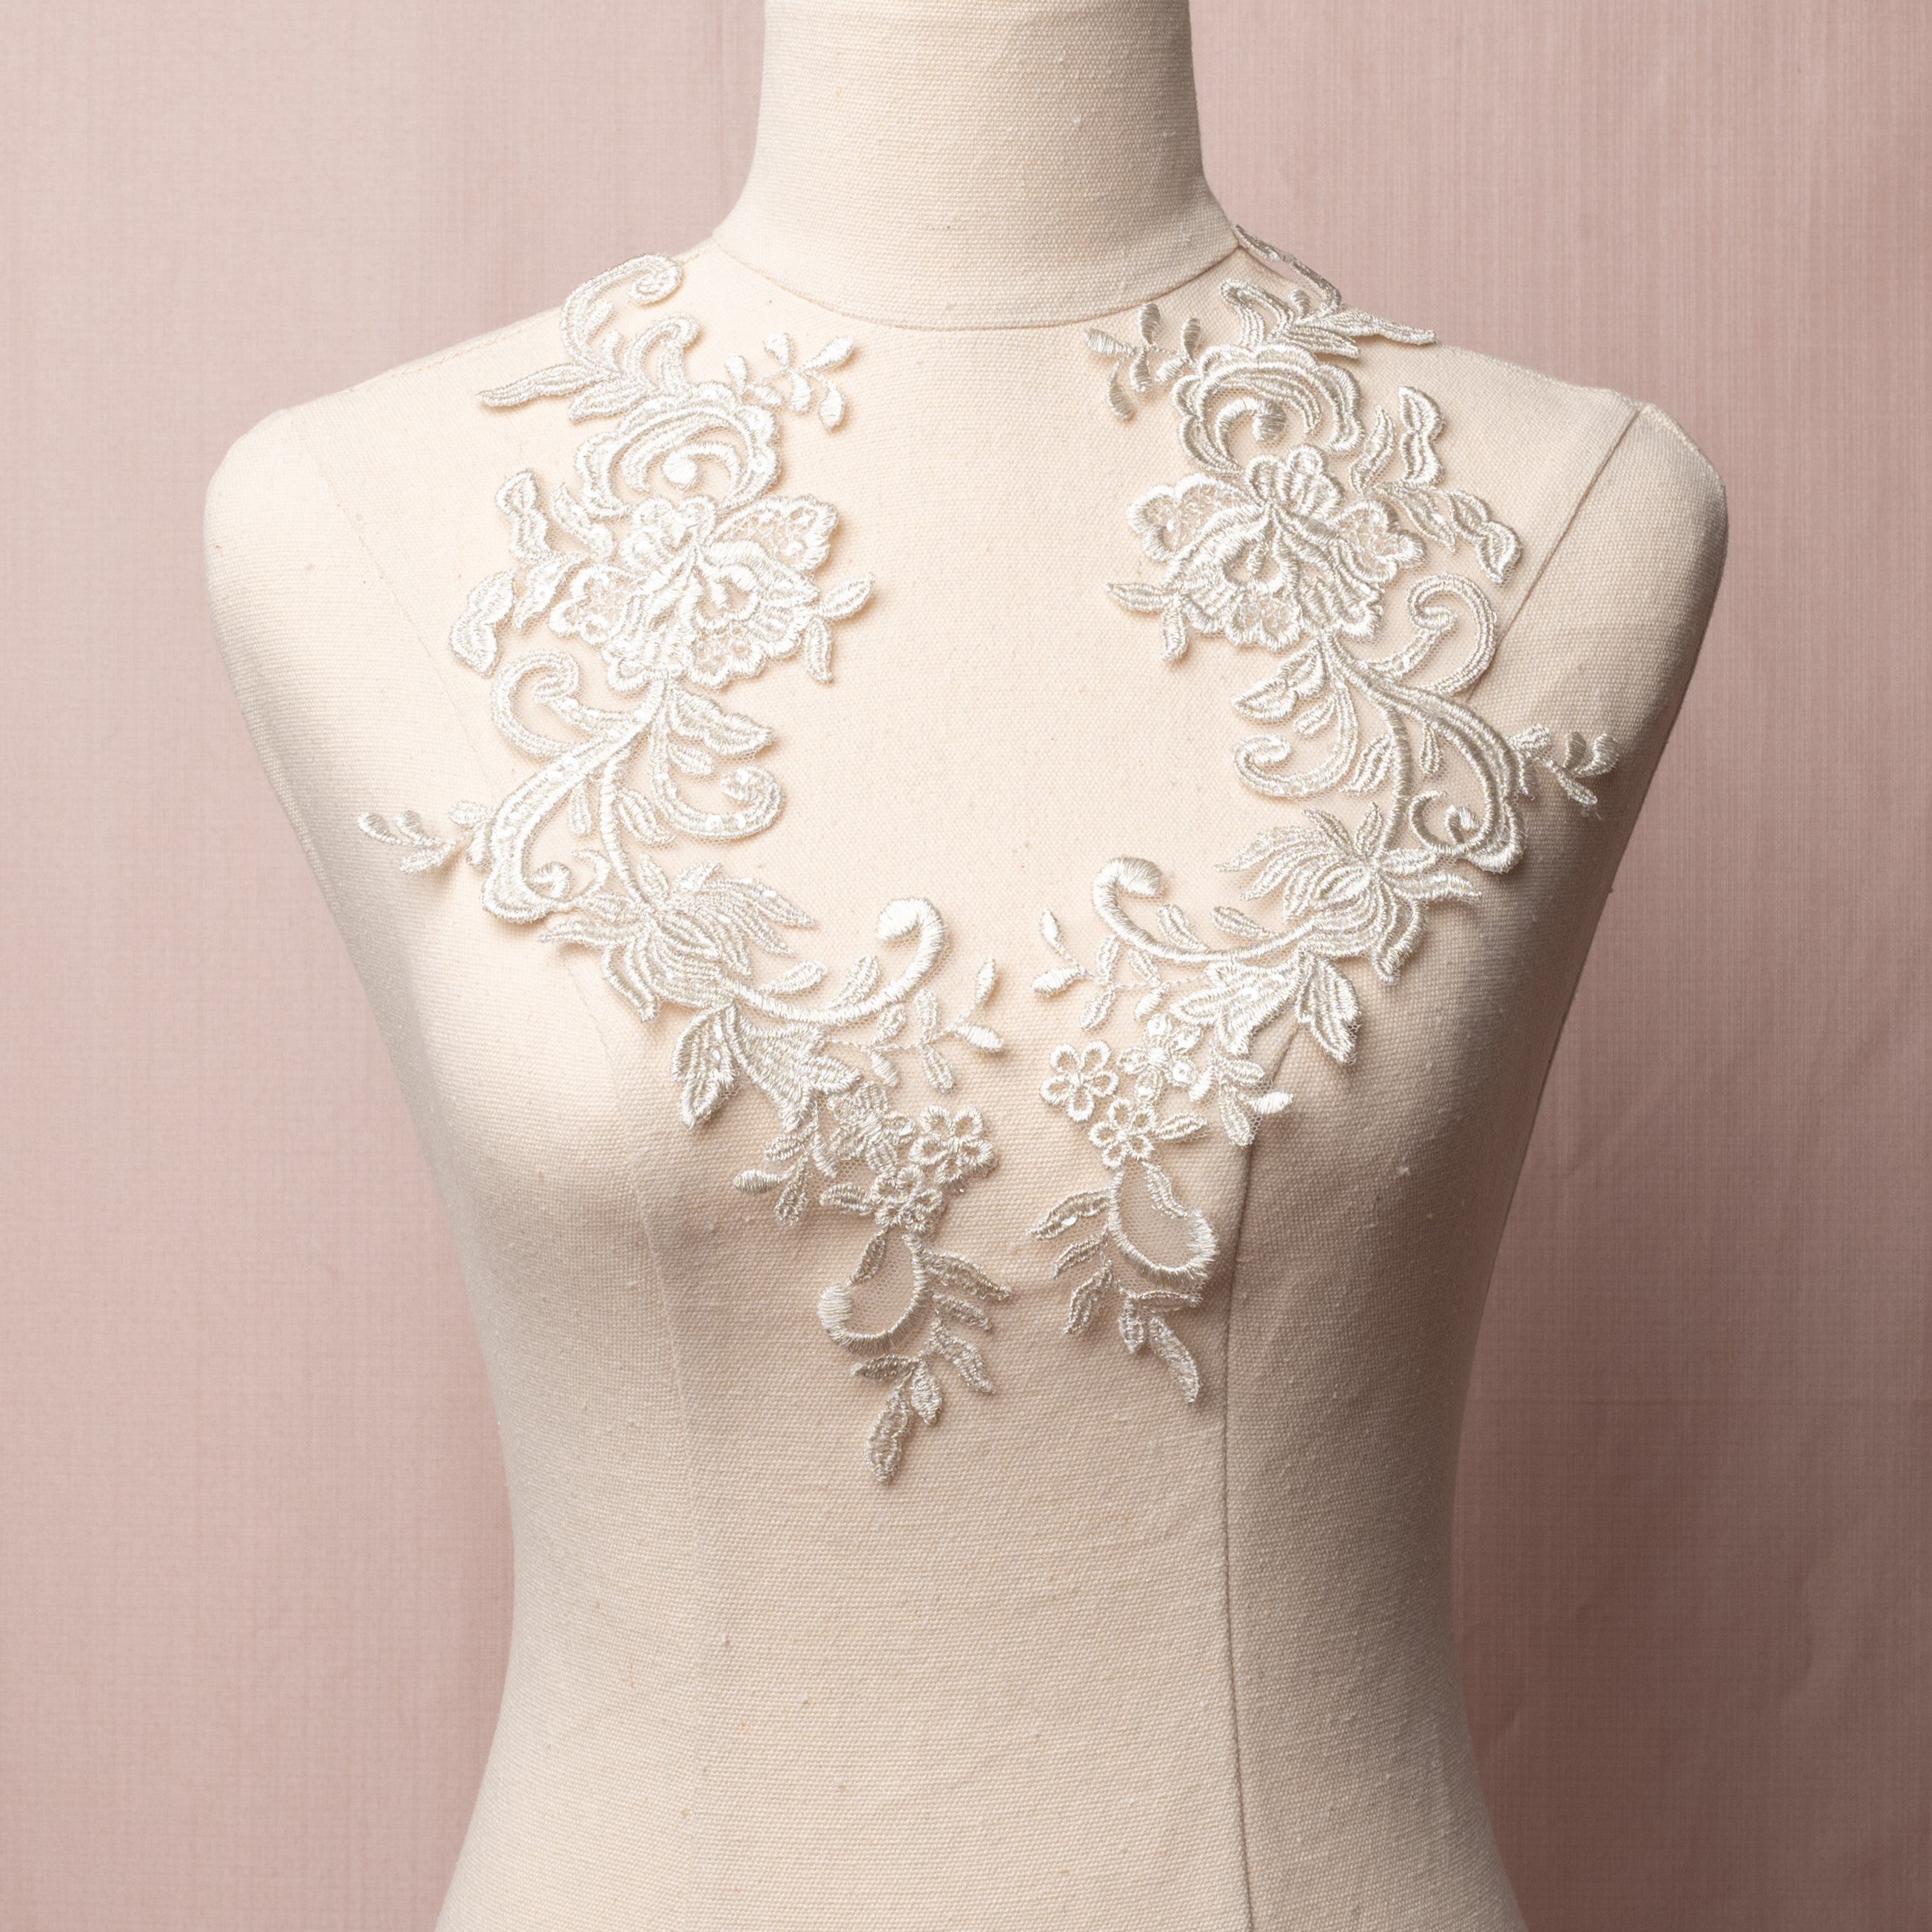 Heavily embroidered silver grey lace applique pair embellished with lurex thread and tiny sequins.